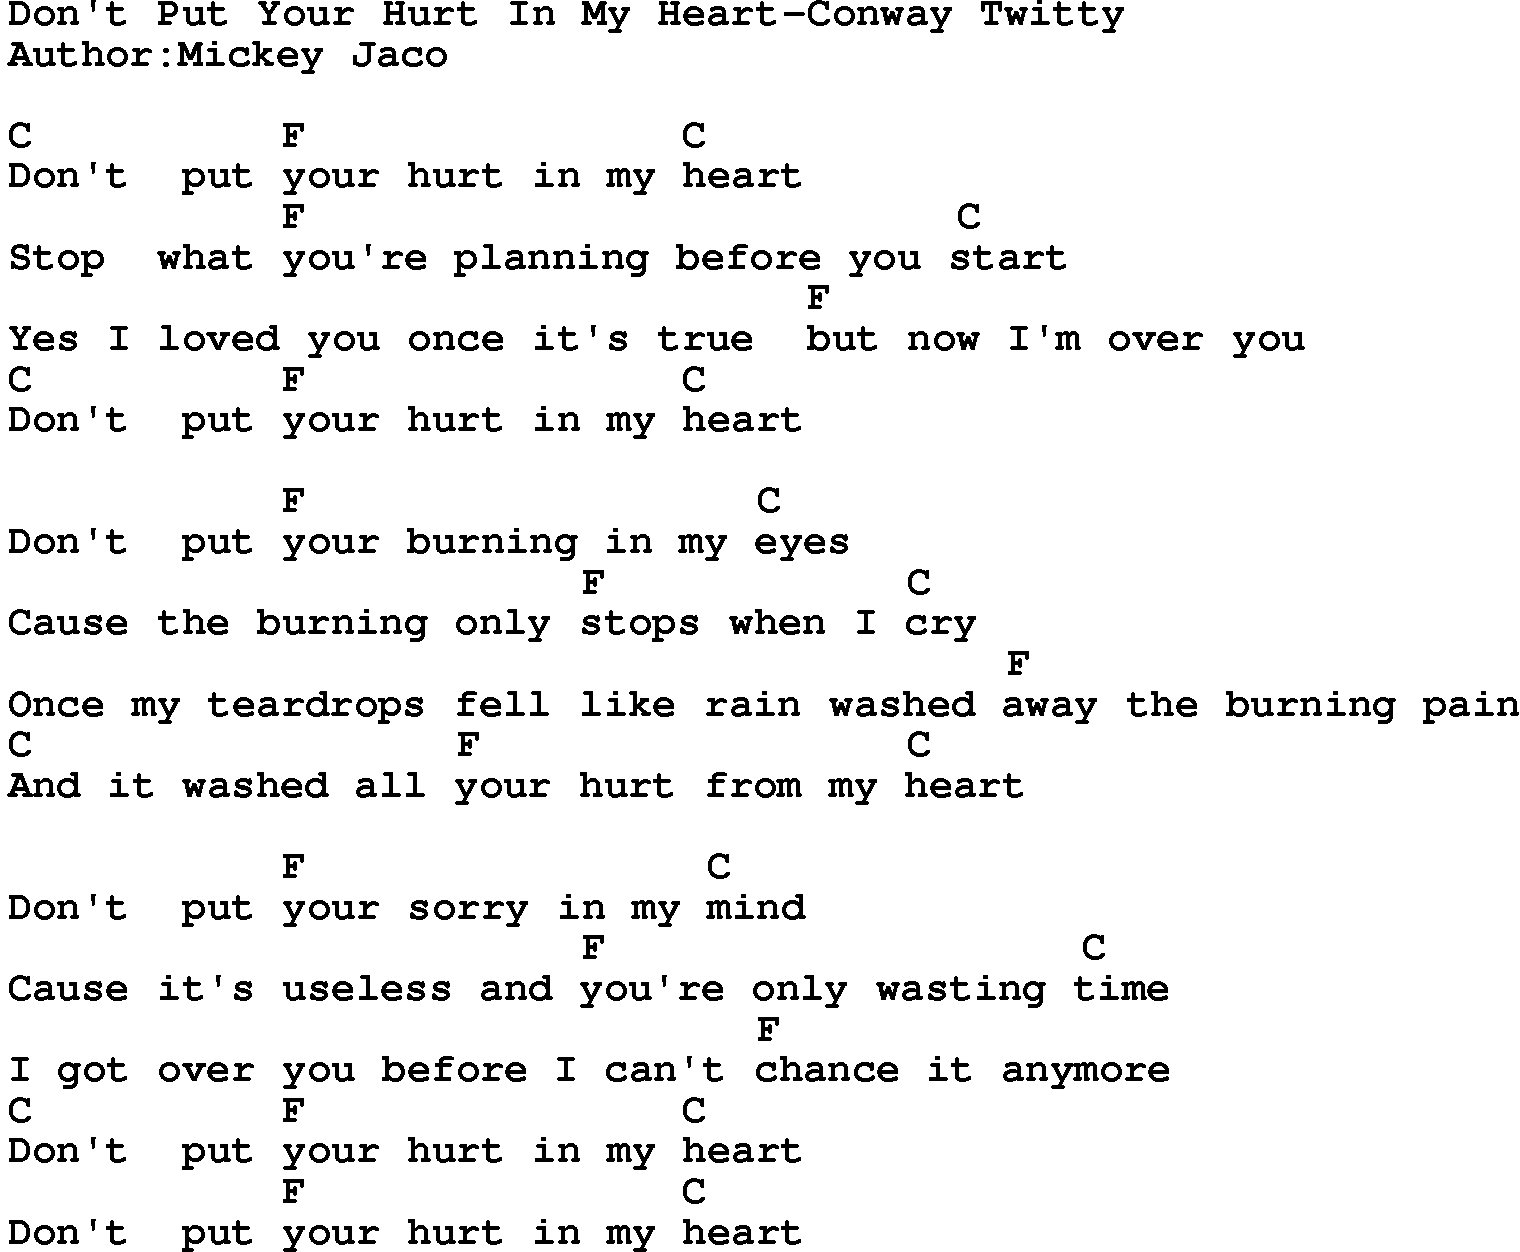 Country music song: Don't Put Your Hurt In My Heart-Conway Twitty lyrics and chords